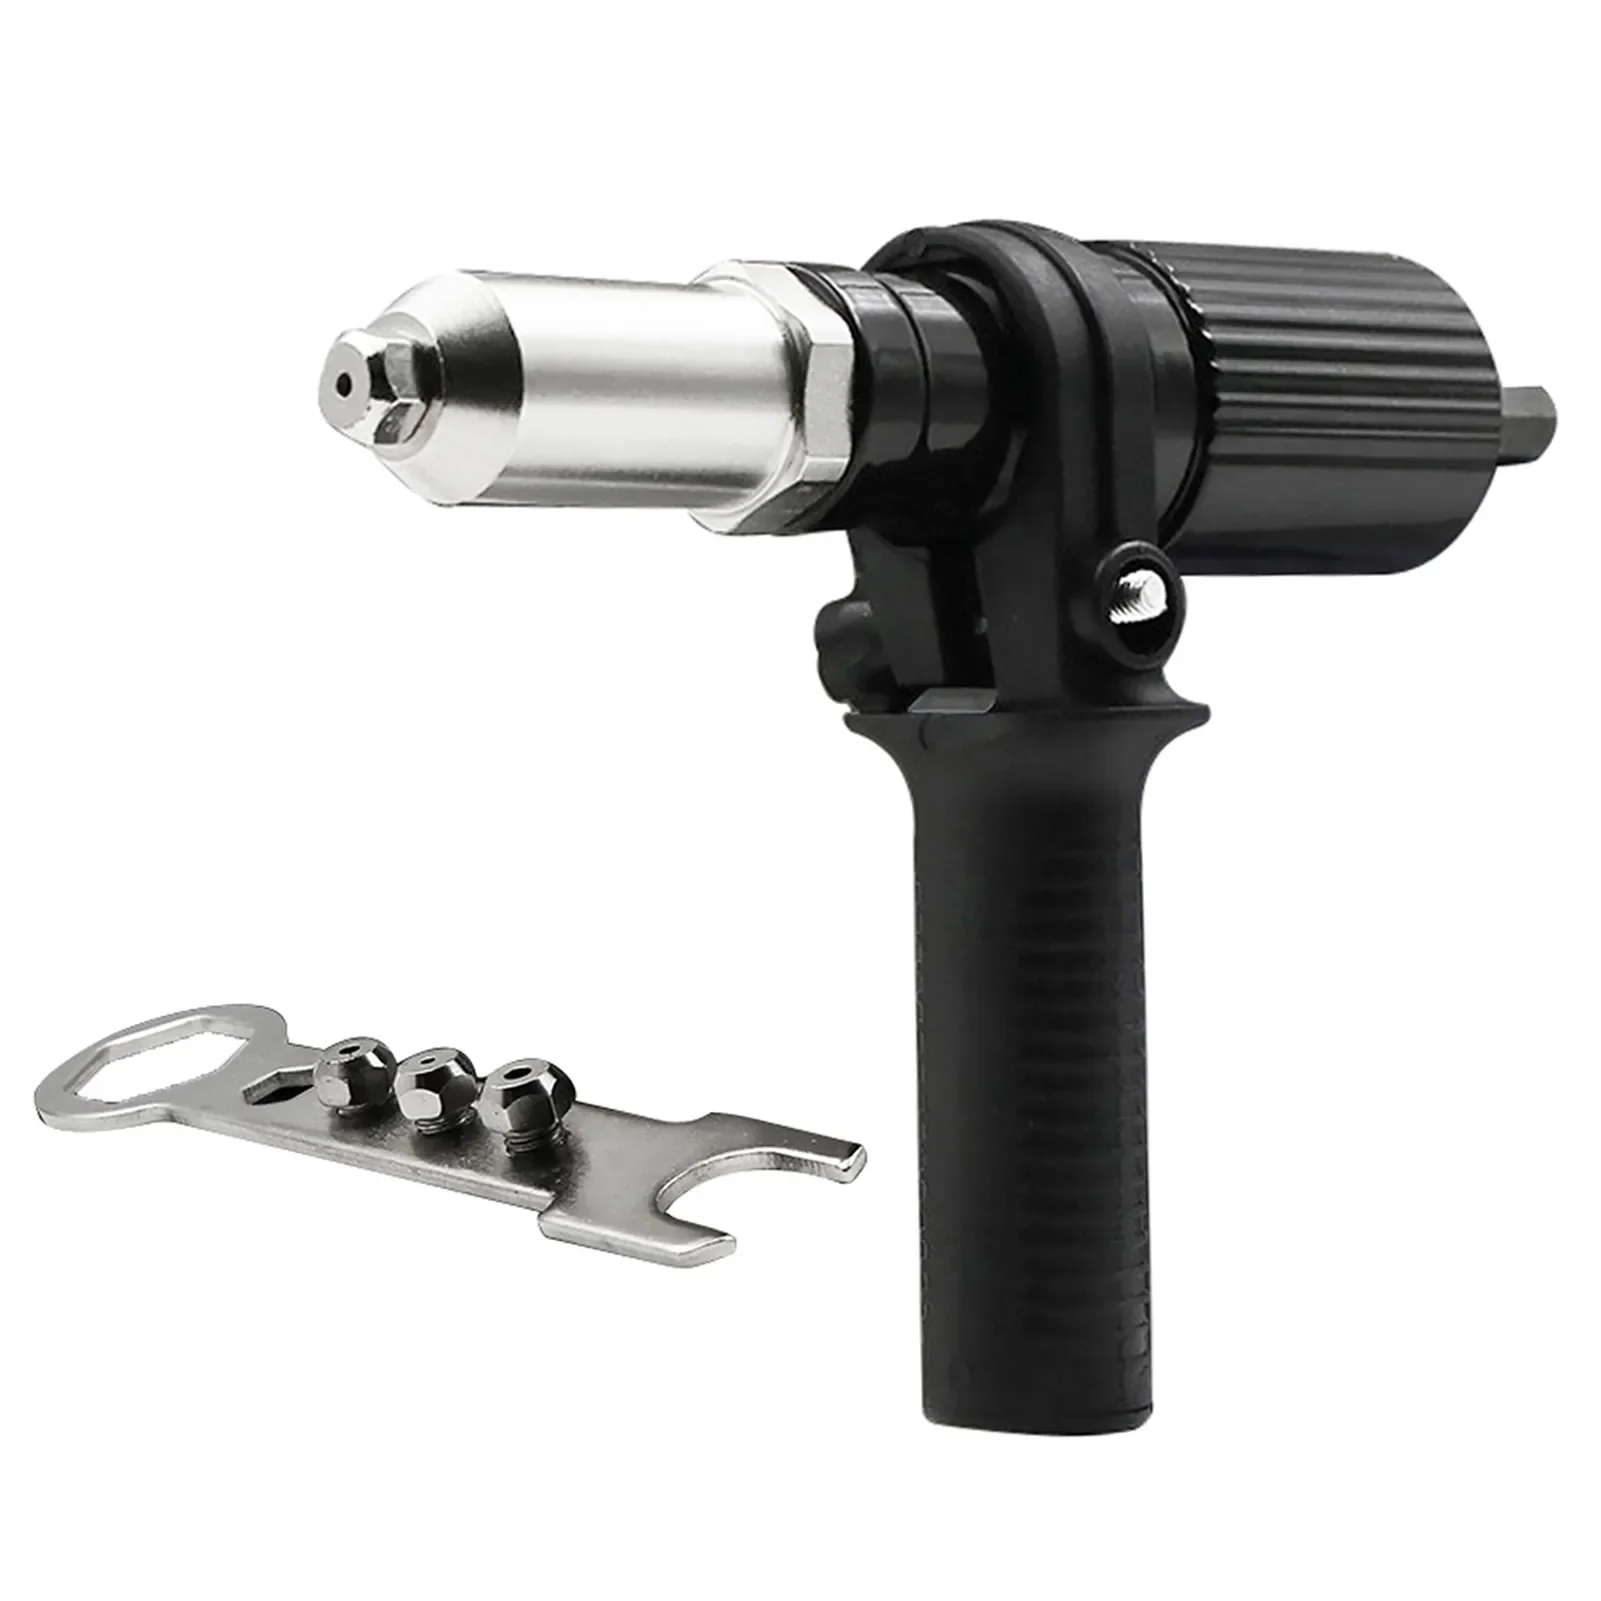 electric-rivet-nut-gun-riveting-tool-core-pull-accessories-attachments-cordless-riveting-drill-joint-adapter-insert-nut-tool